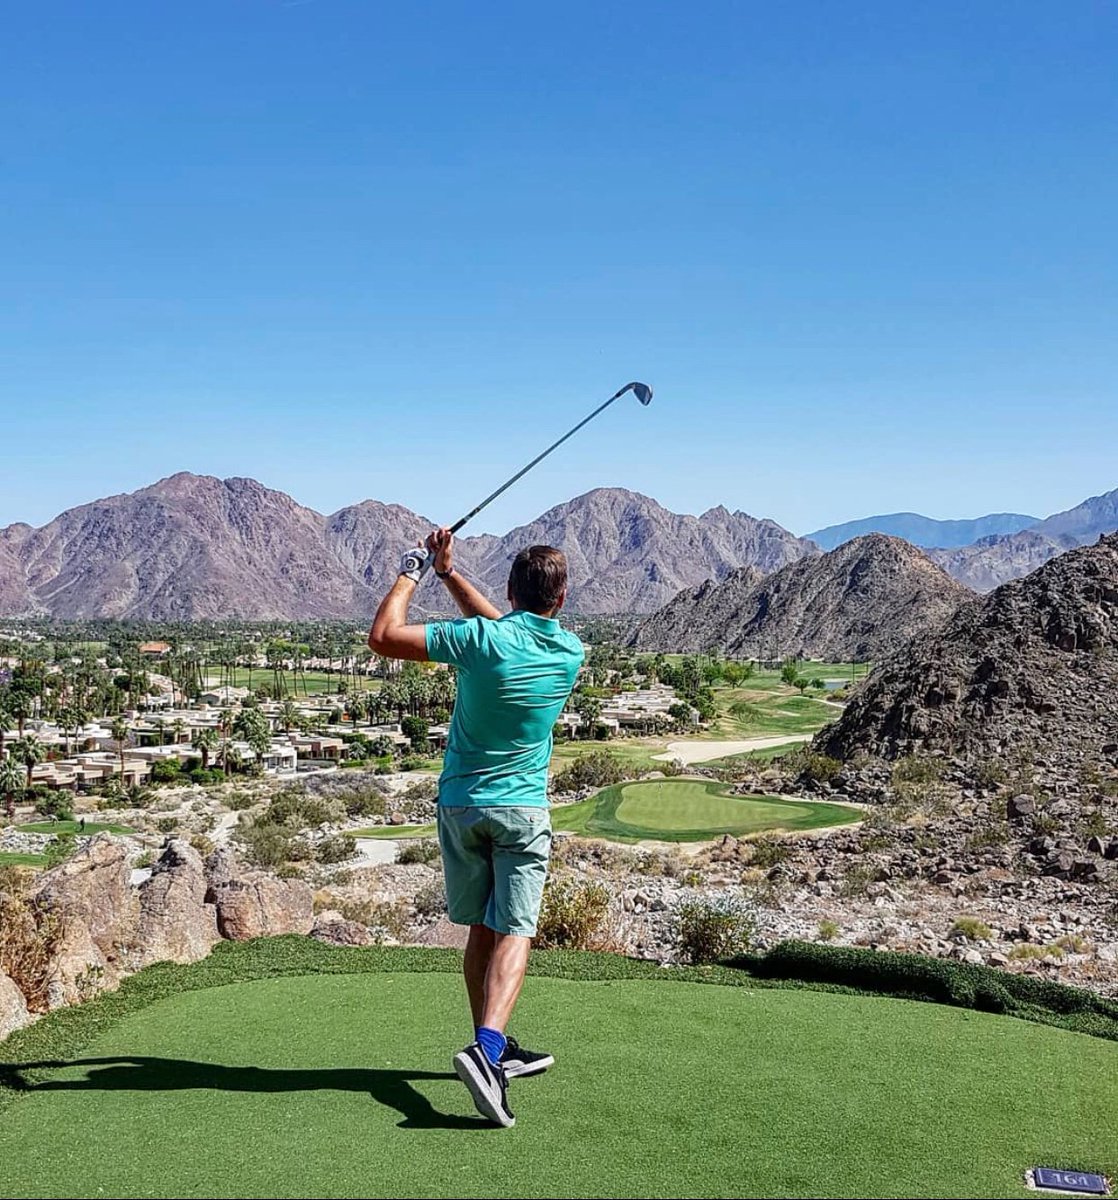 Nothing like a day on the Mountain Course ⛳ PC: @mikemuchosk #laquintaresort #waldorfastoria #mountaincourse